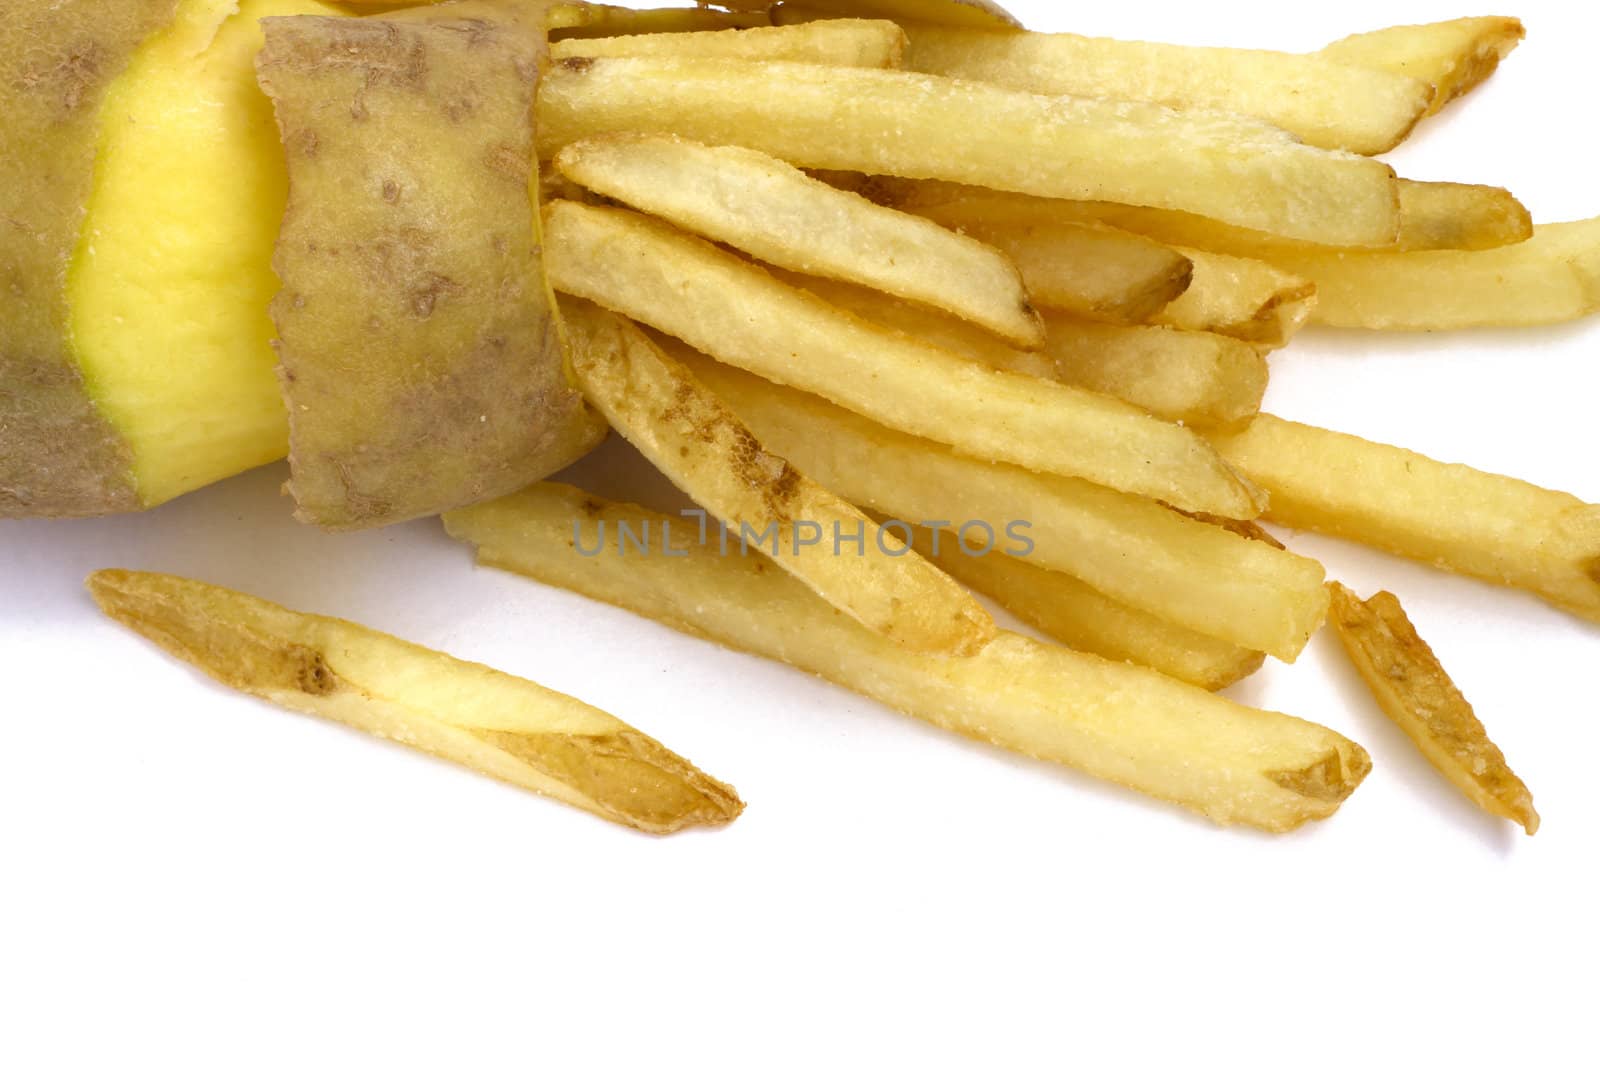 Peeled potato and french fries concept isolated on white